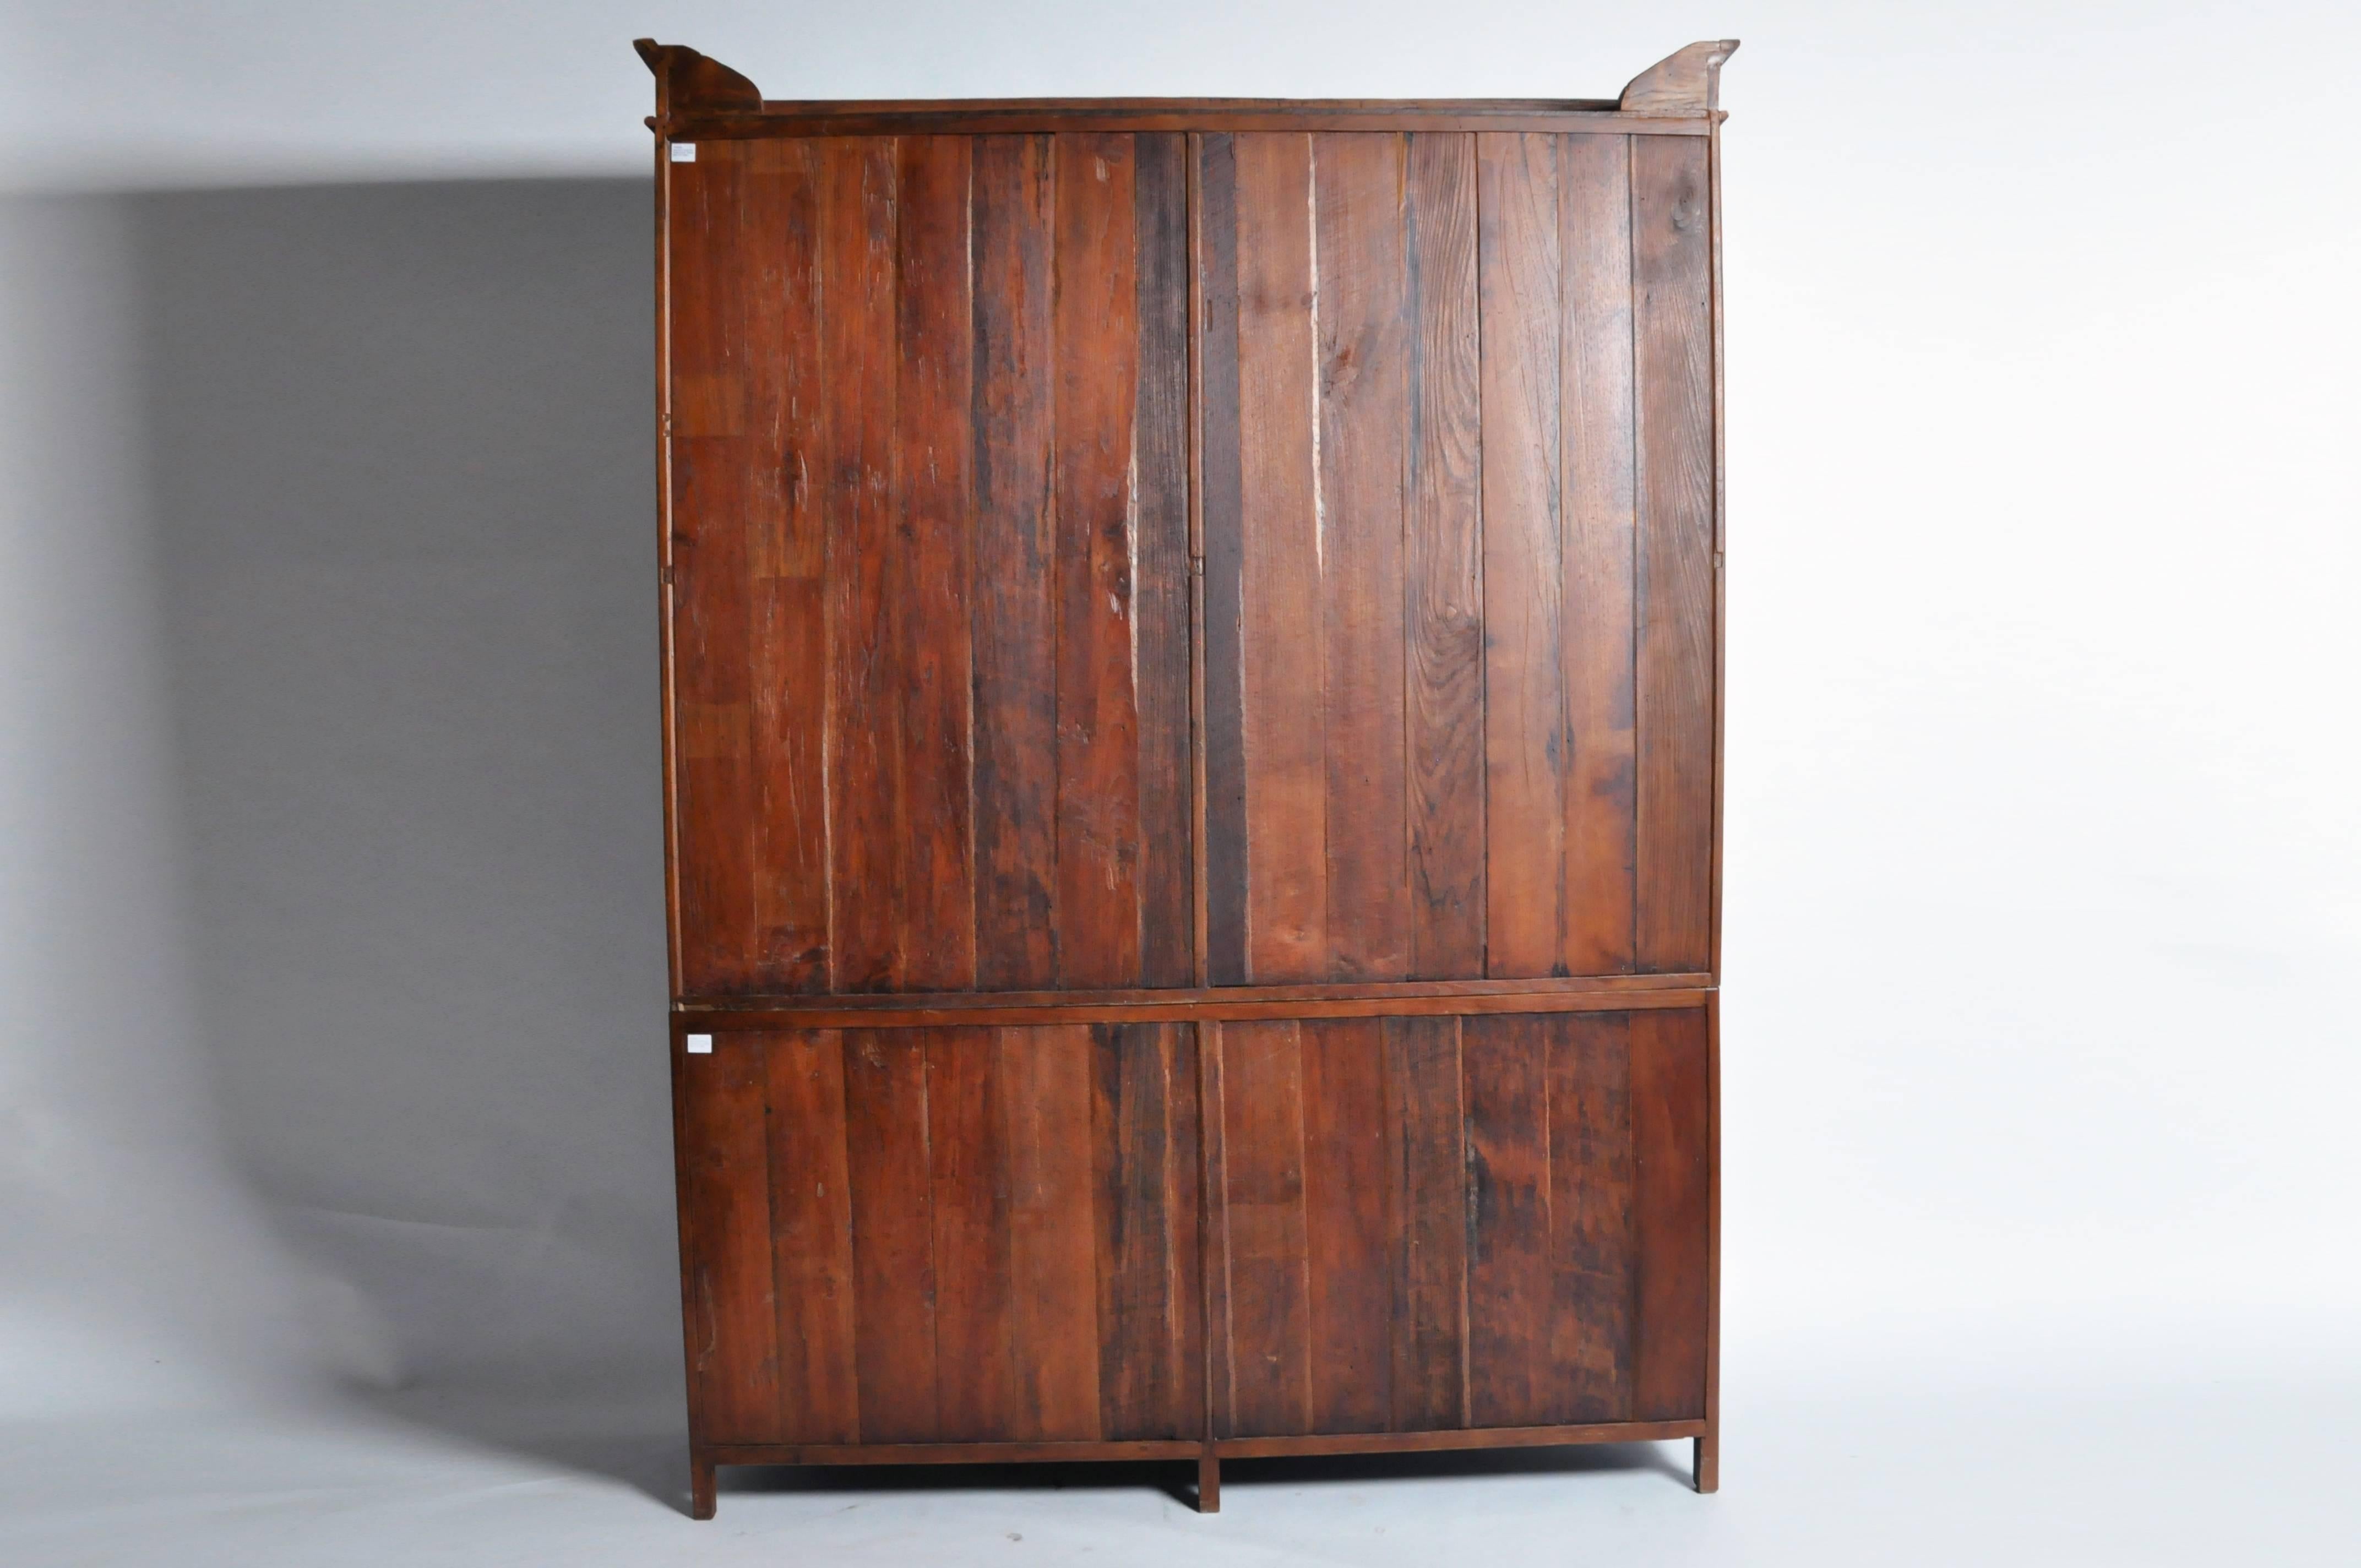 This important Burmese British Colonial cabinet comes in two parts, the top having a stepped cornice over two sets of glazed doors and the lower section featuring two pairs of glazed doors with horizontal teak mullions. Both open to compartments